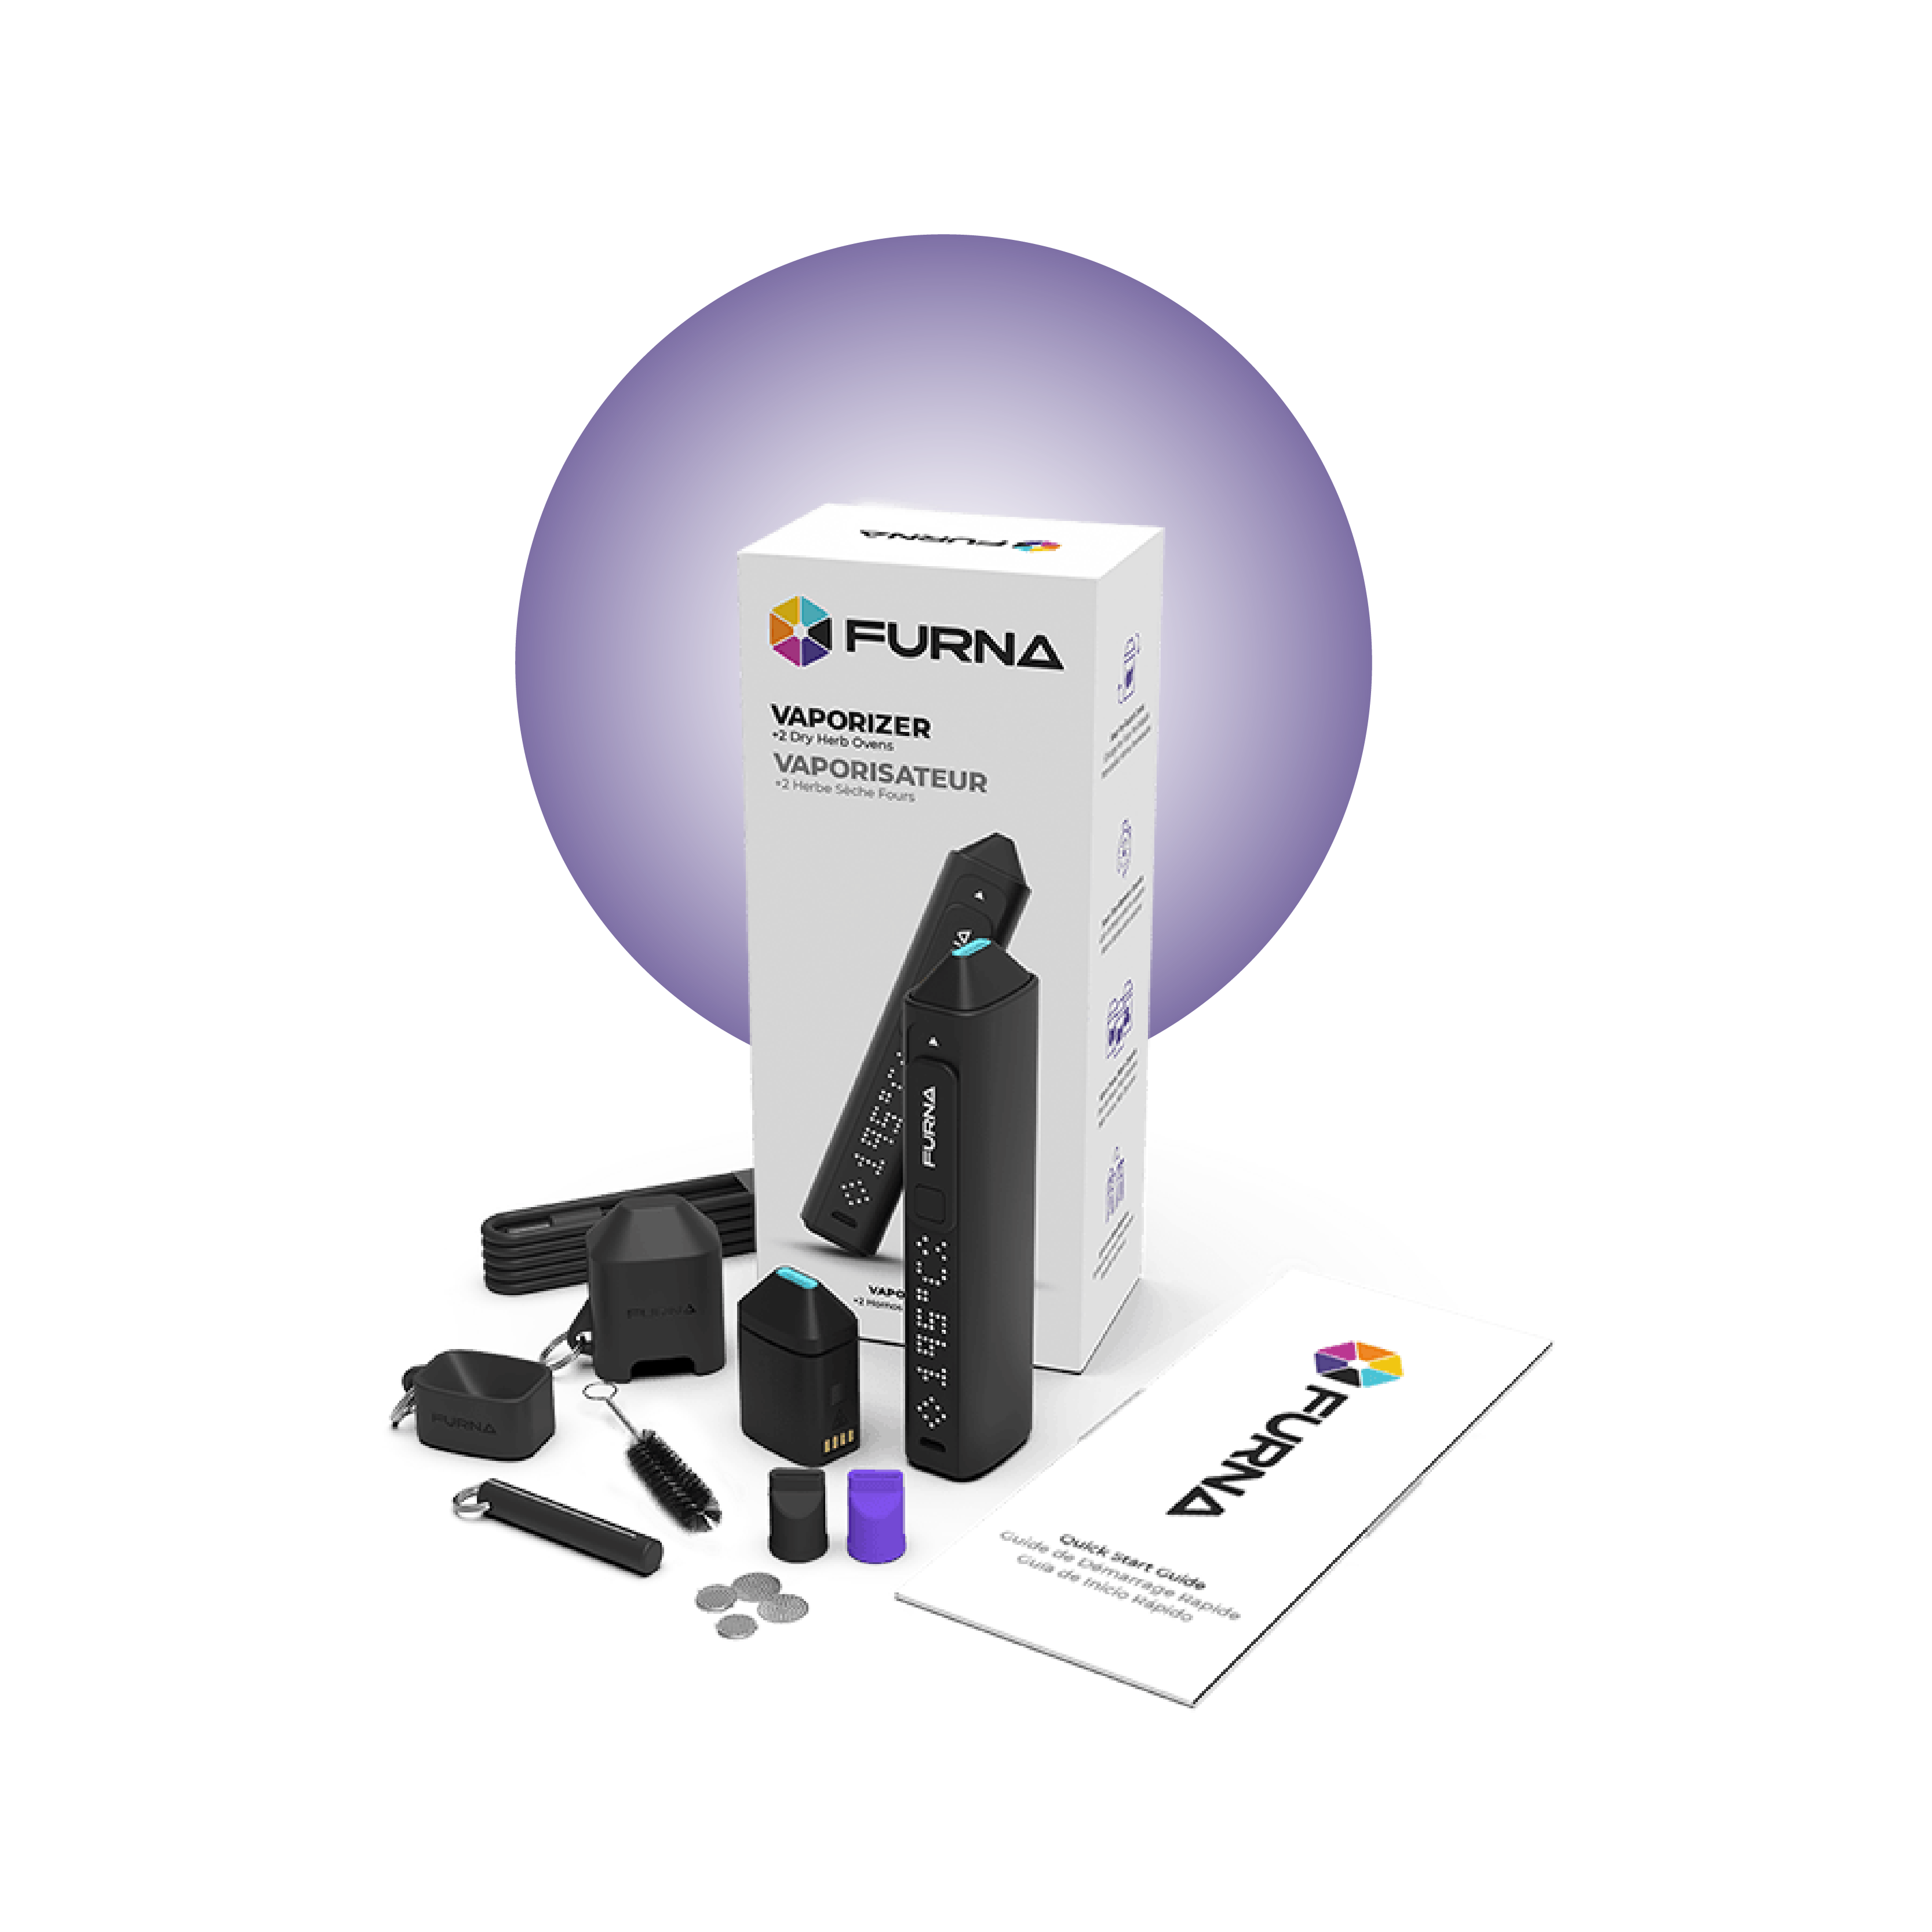 Furna Vaporizer Complete Kit with 2 Dry Herb Ovens